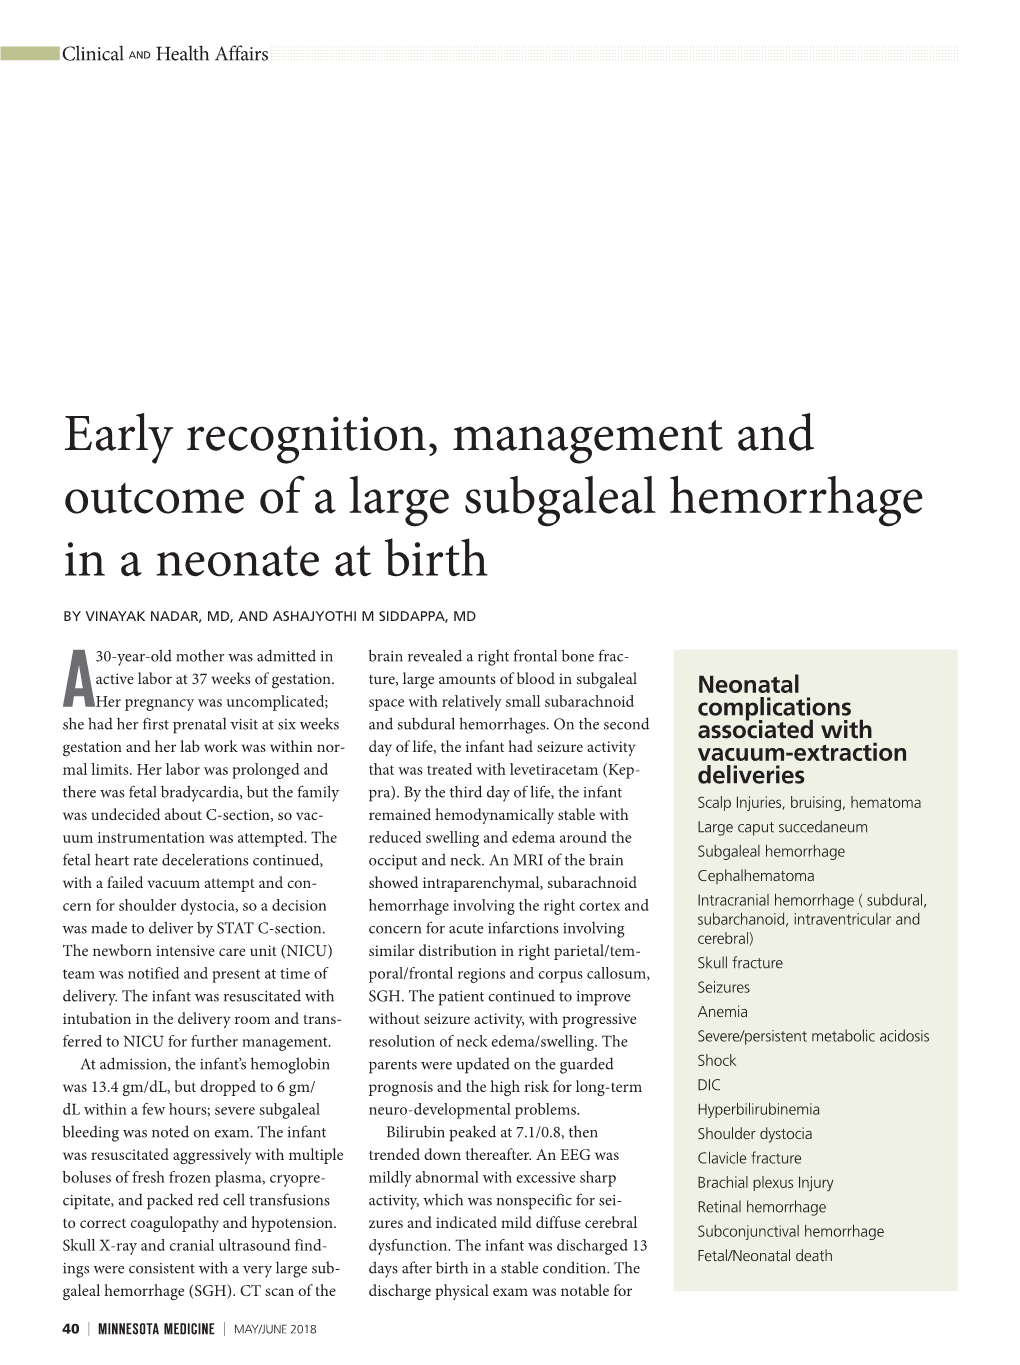 Early Recognition, Management and Outcome of a Large Subgaleal Hemorrhage in a Neonate at Birth